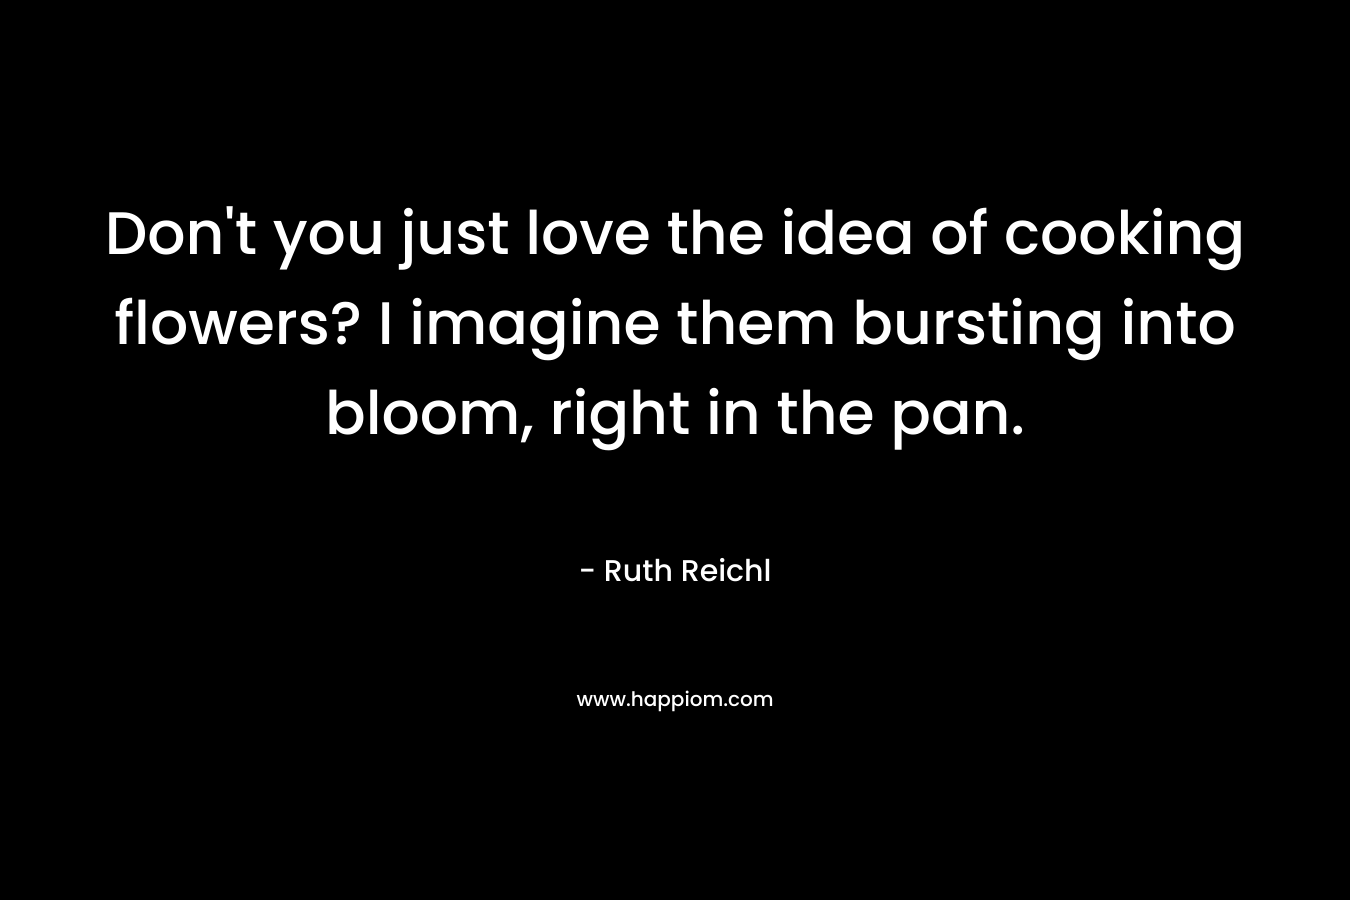 Don't you just love the idea of cooking flowers? I imagine them bursting into bloom, right in the pan.